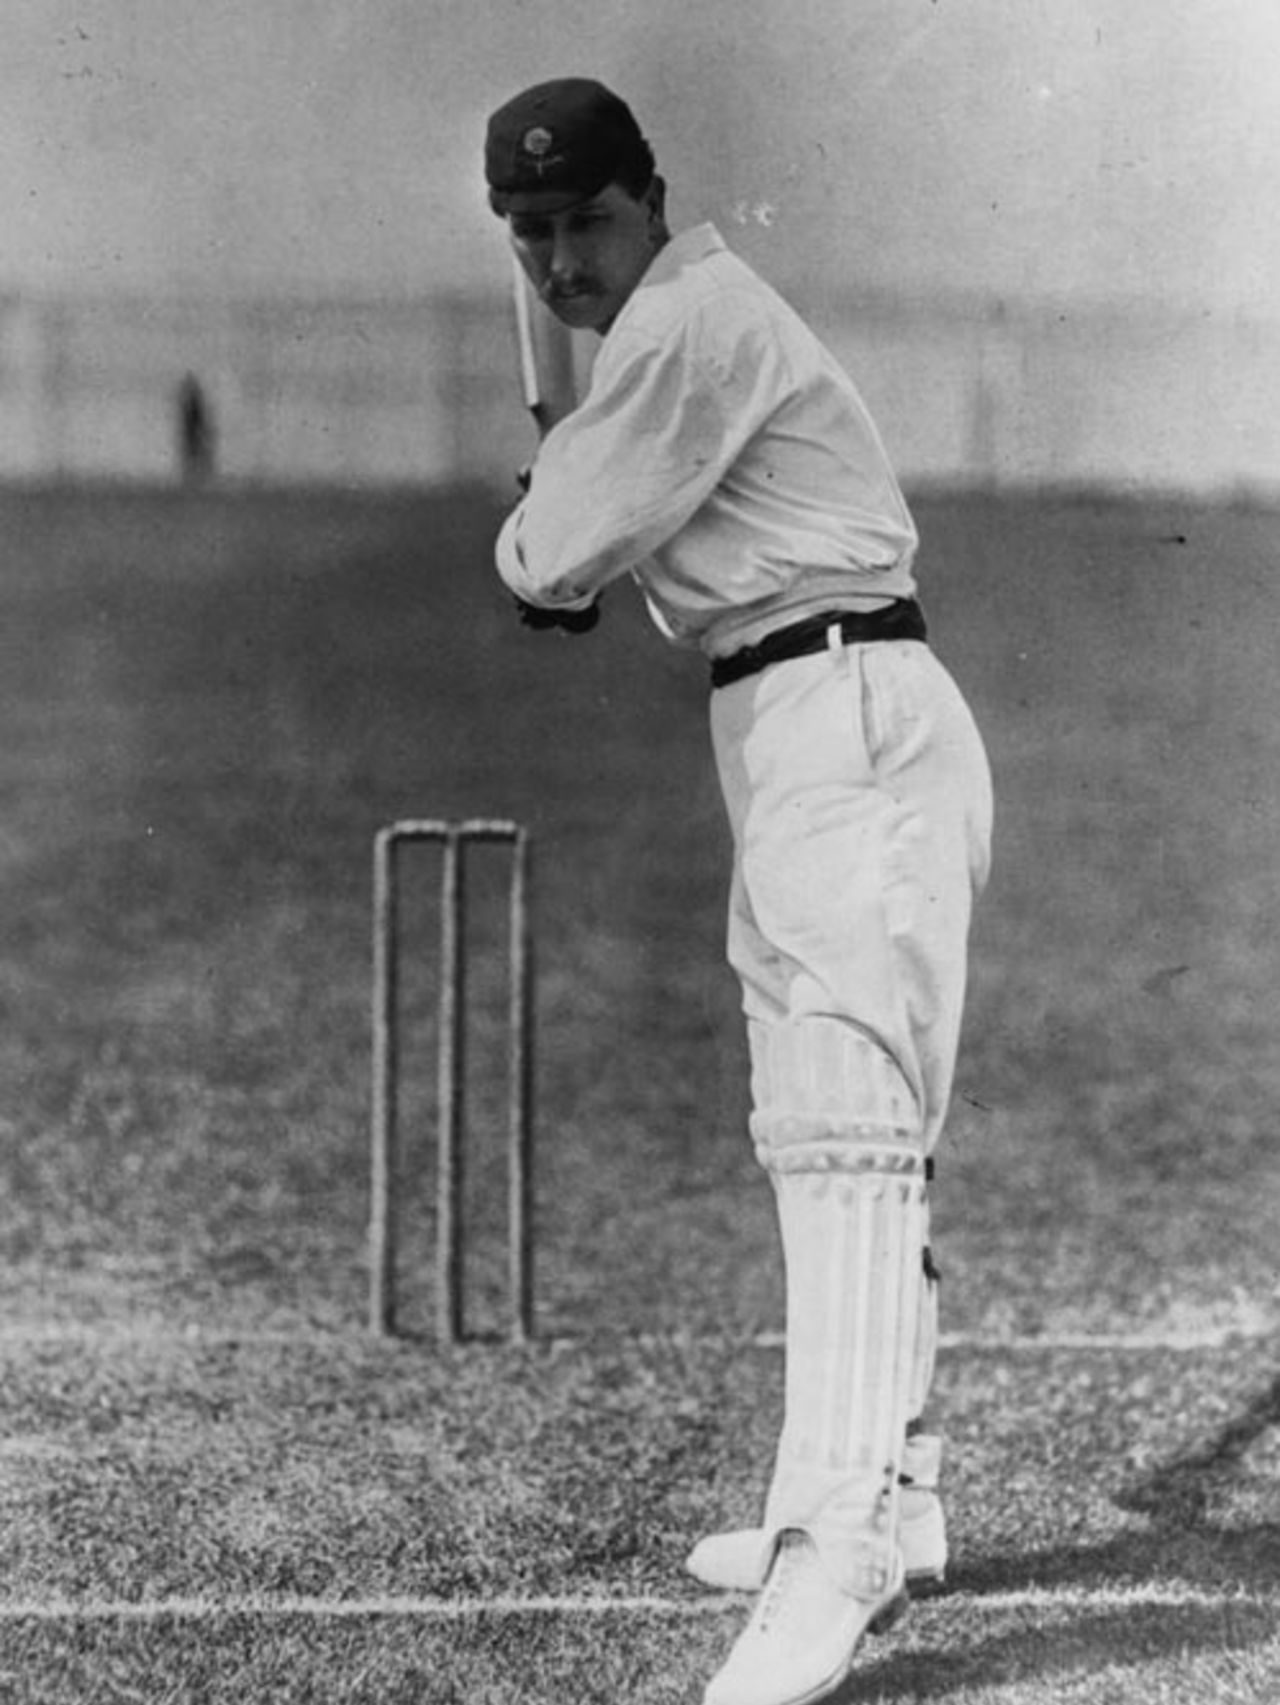 Johnny Tyldesley gets ready to play a stroke, 1905